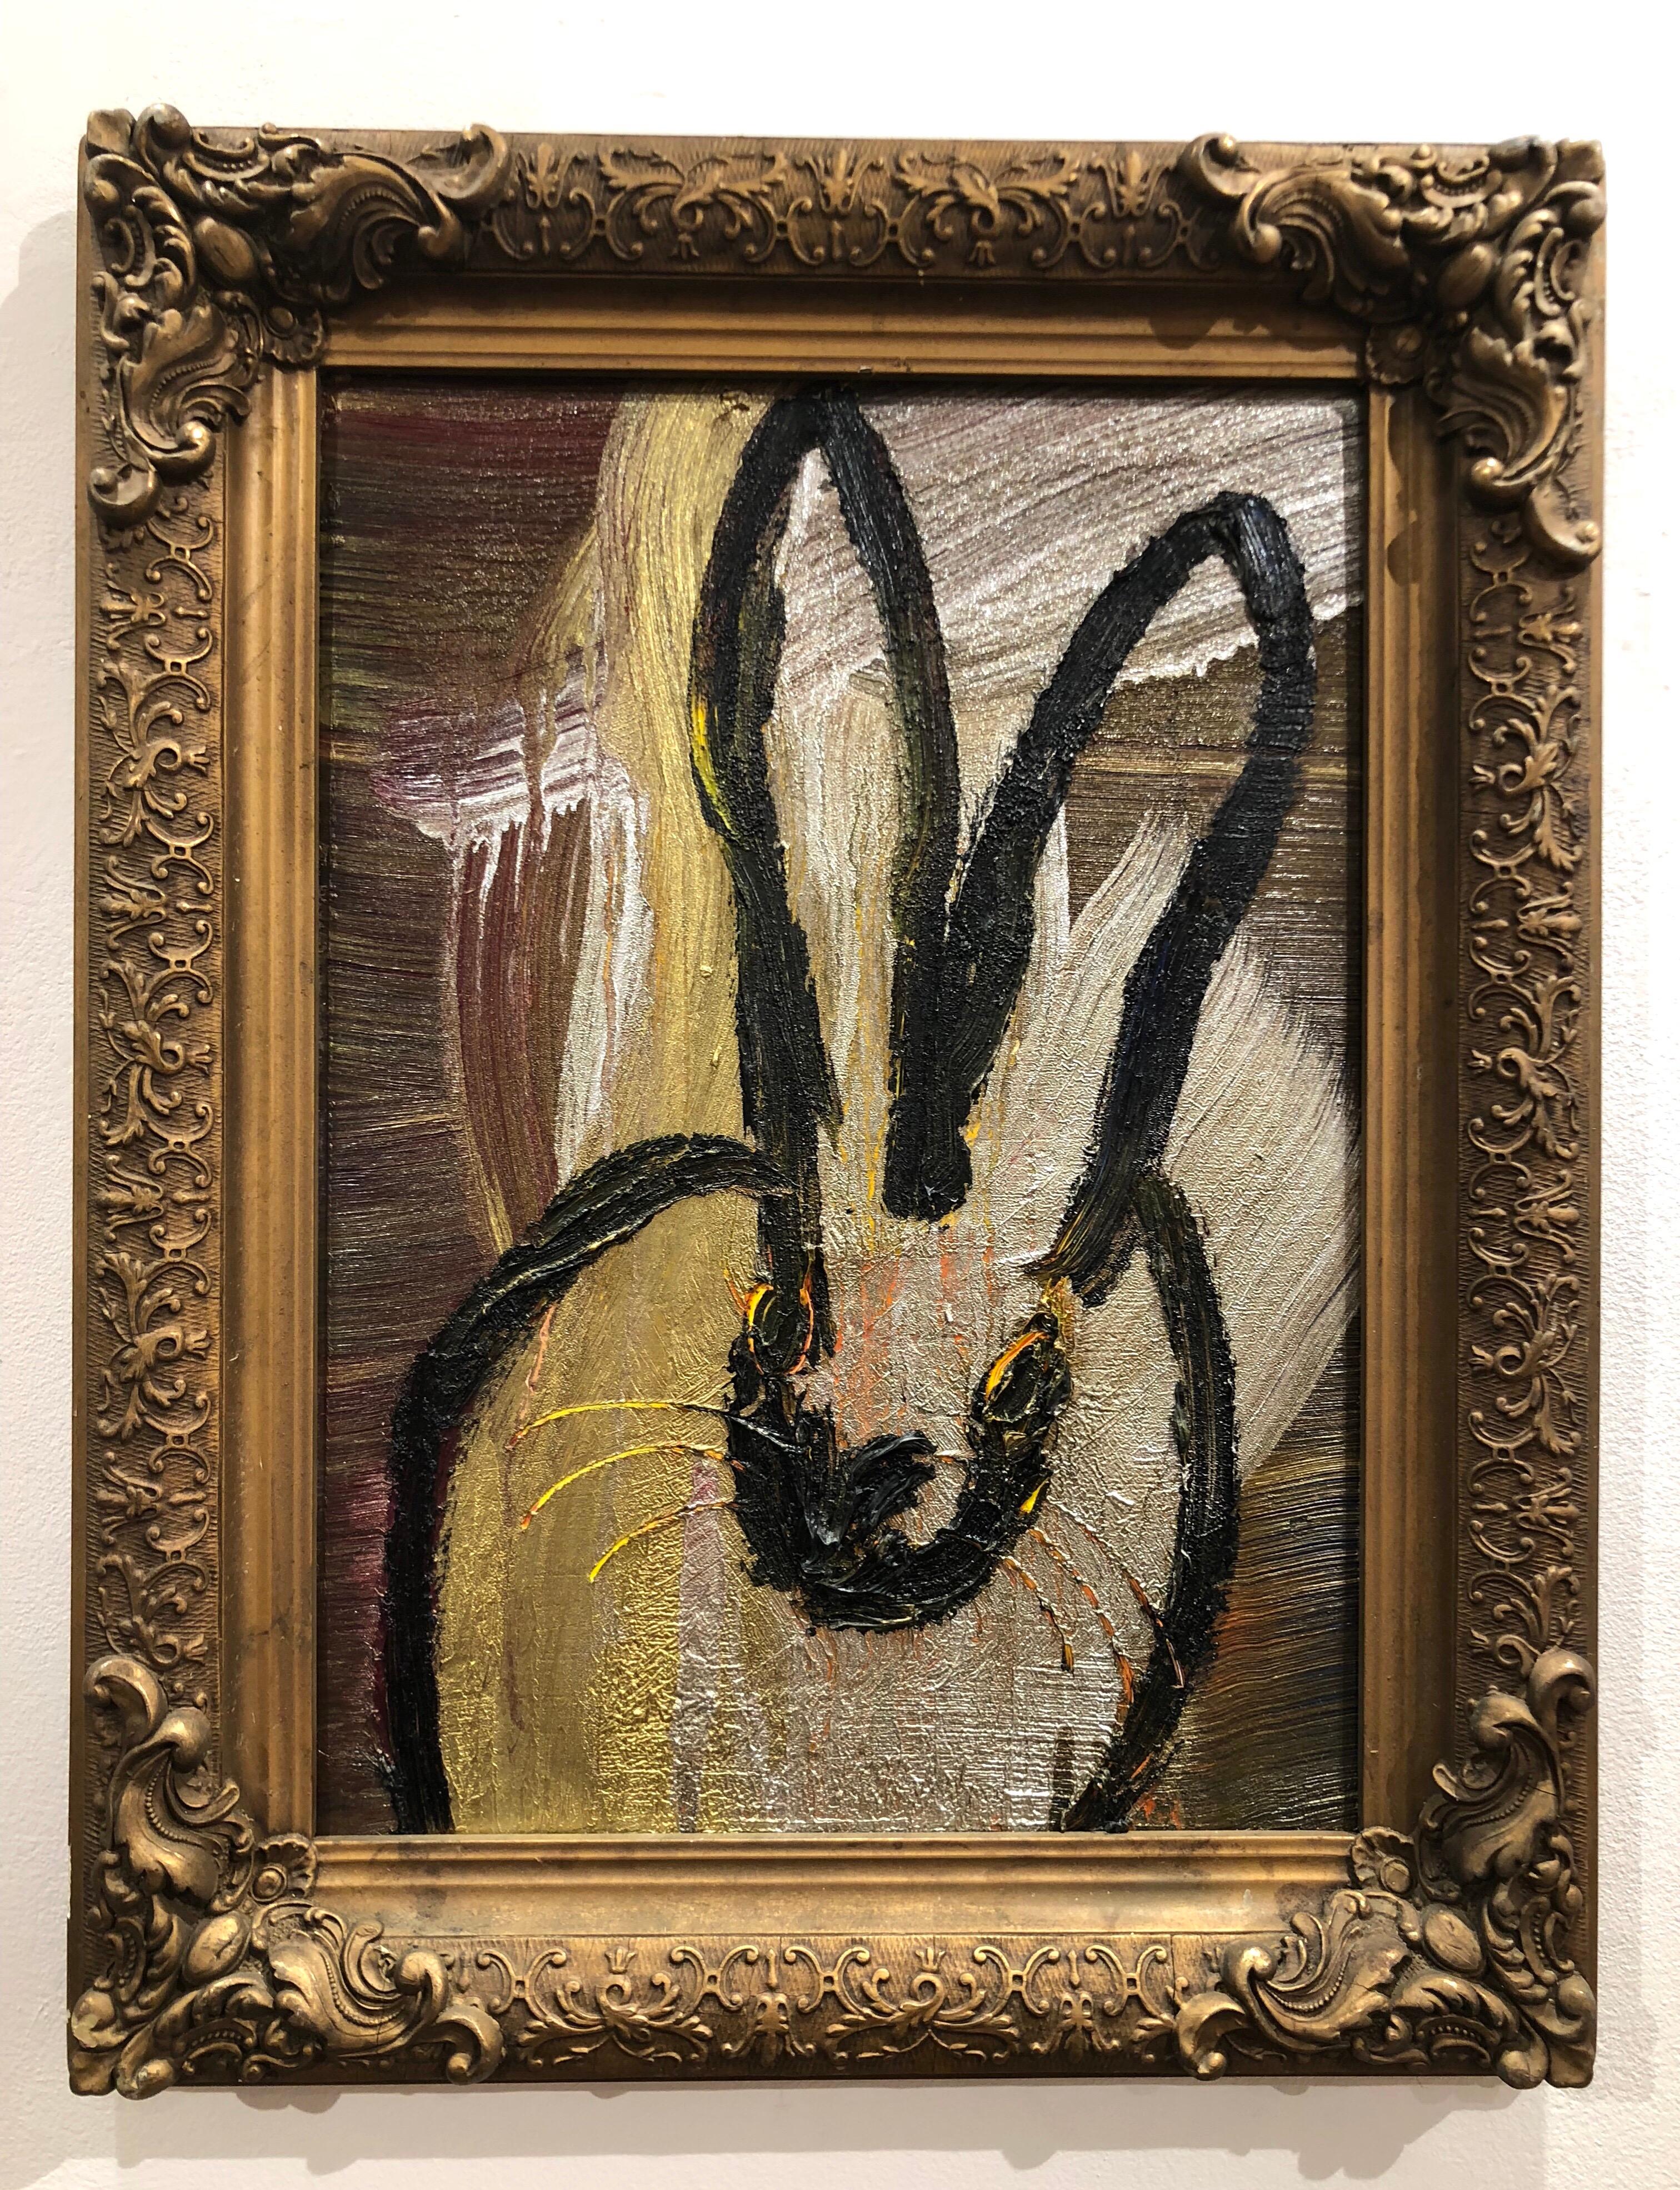 Silver & Gold Bunny - Painting by Hunt Slonem